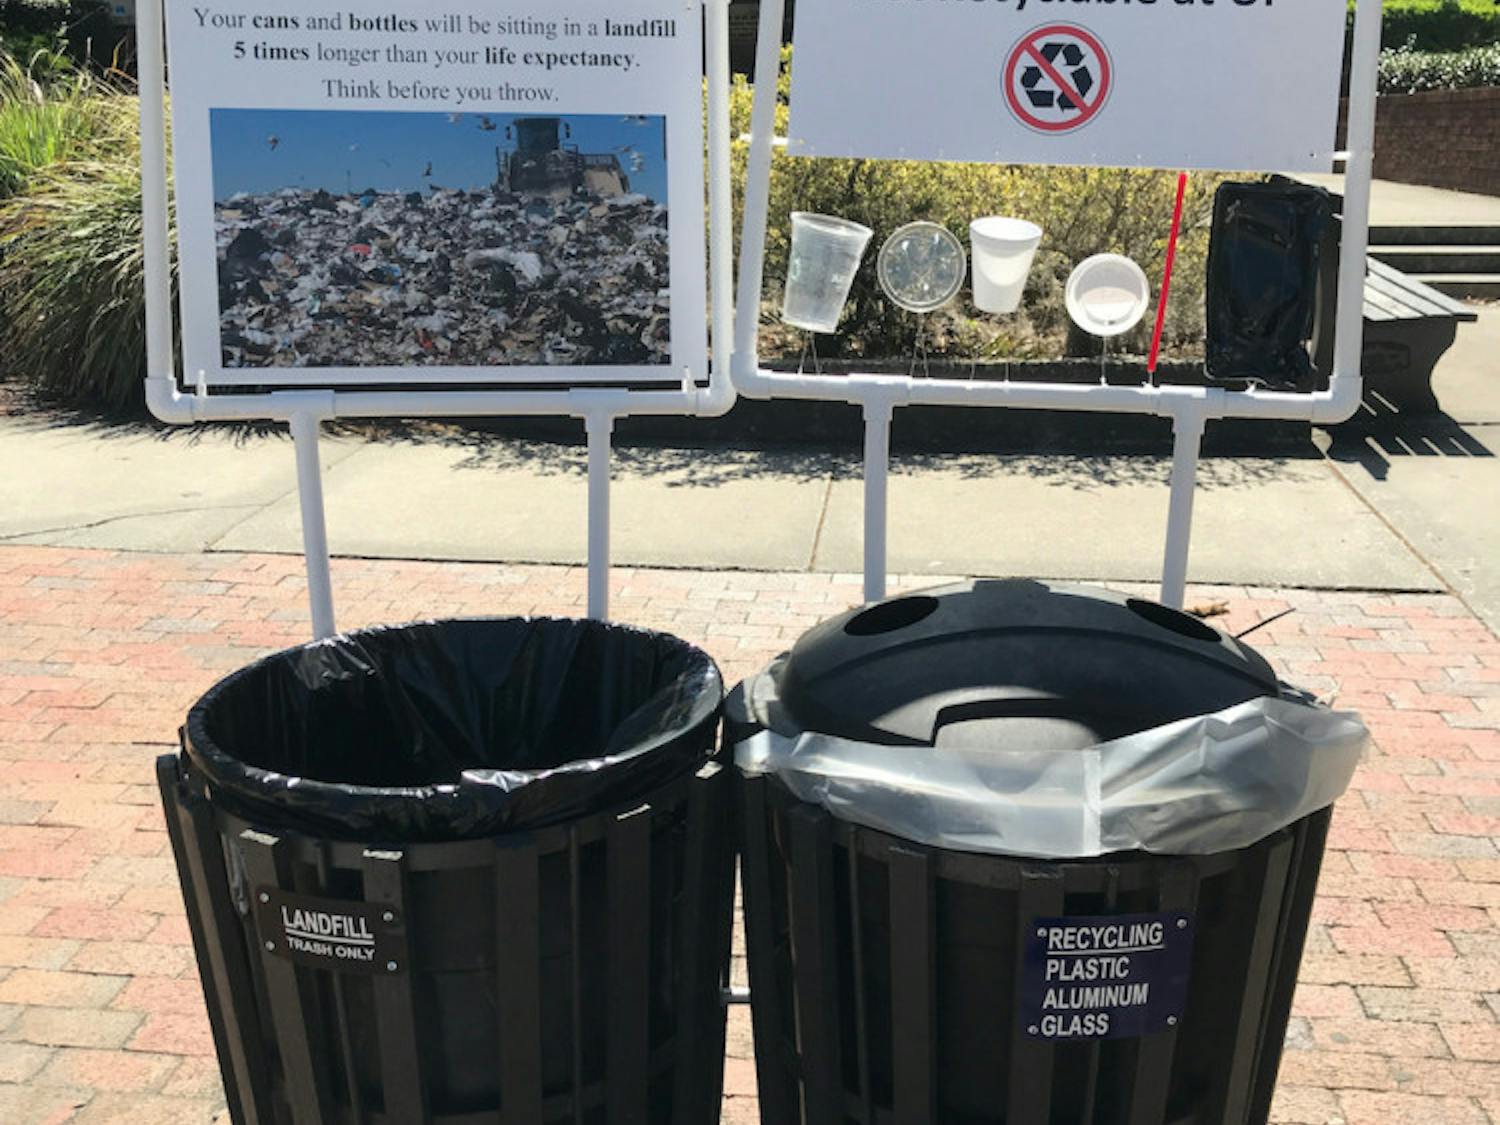 Pictured is a pair signs framed by PVC pipes hanging next to a set of trash and recycling cans that appeared on campus early Monday morning. The signs are part of a student research project by UF/IFAS first-year PhD student Amanda Brinton. The signs will be up until April 20, she said.